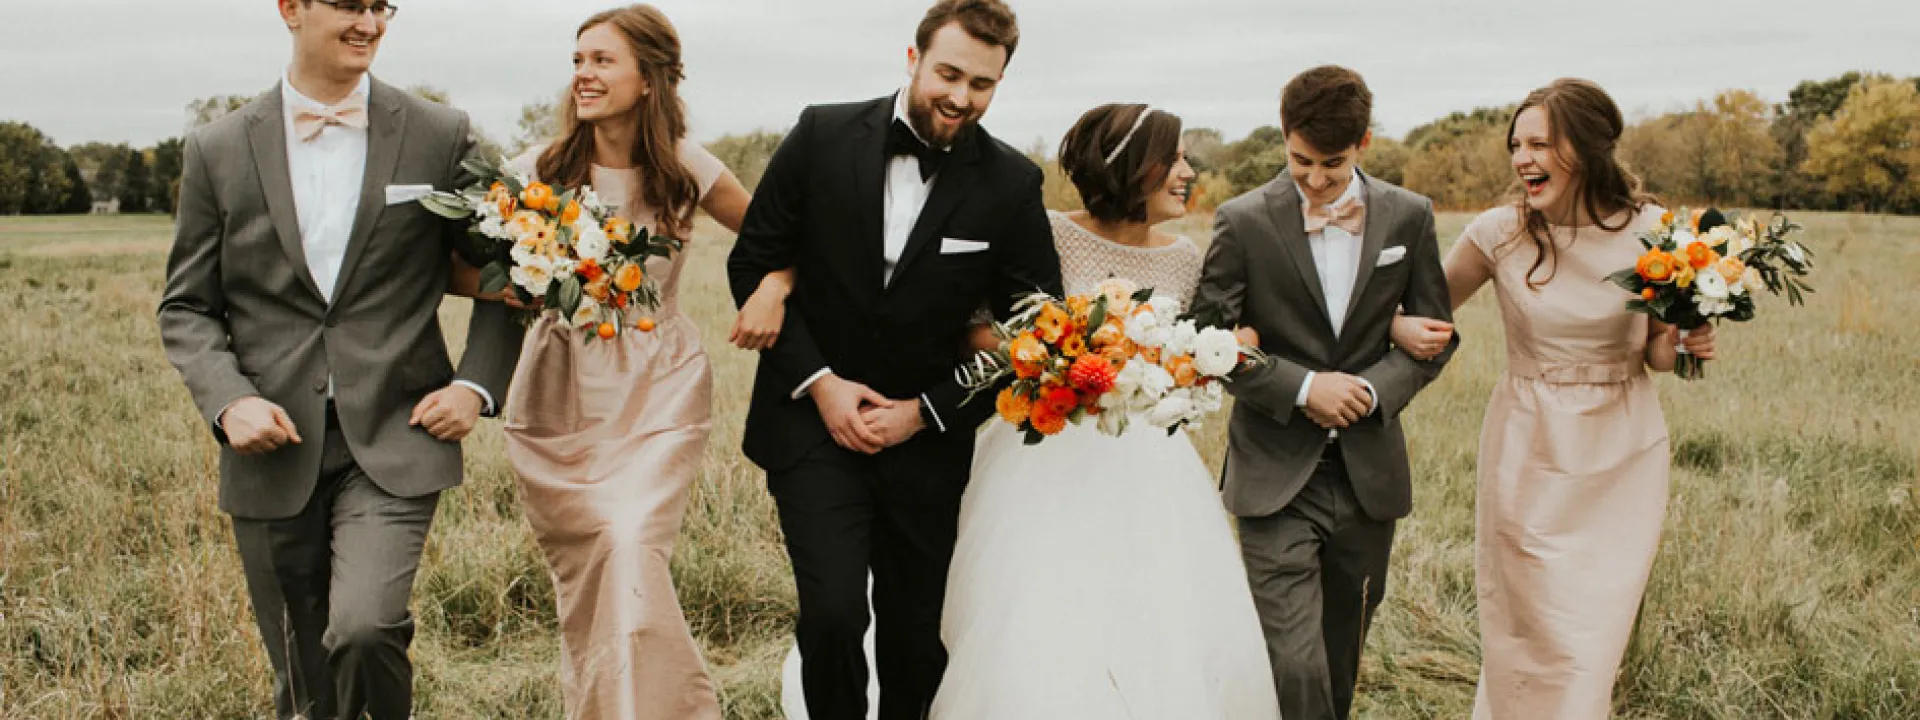 The bridal party, in shades of orange and pastel pink, walks through a rolling field